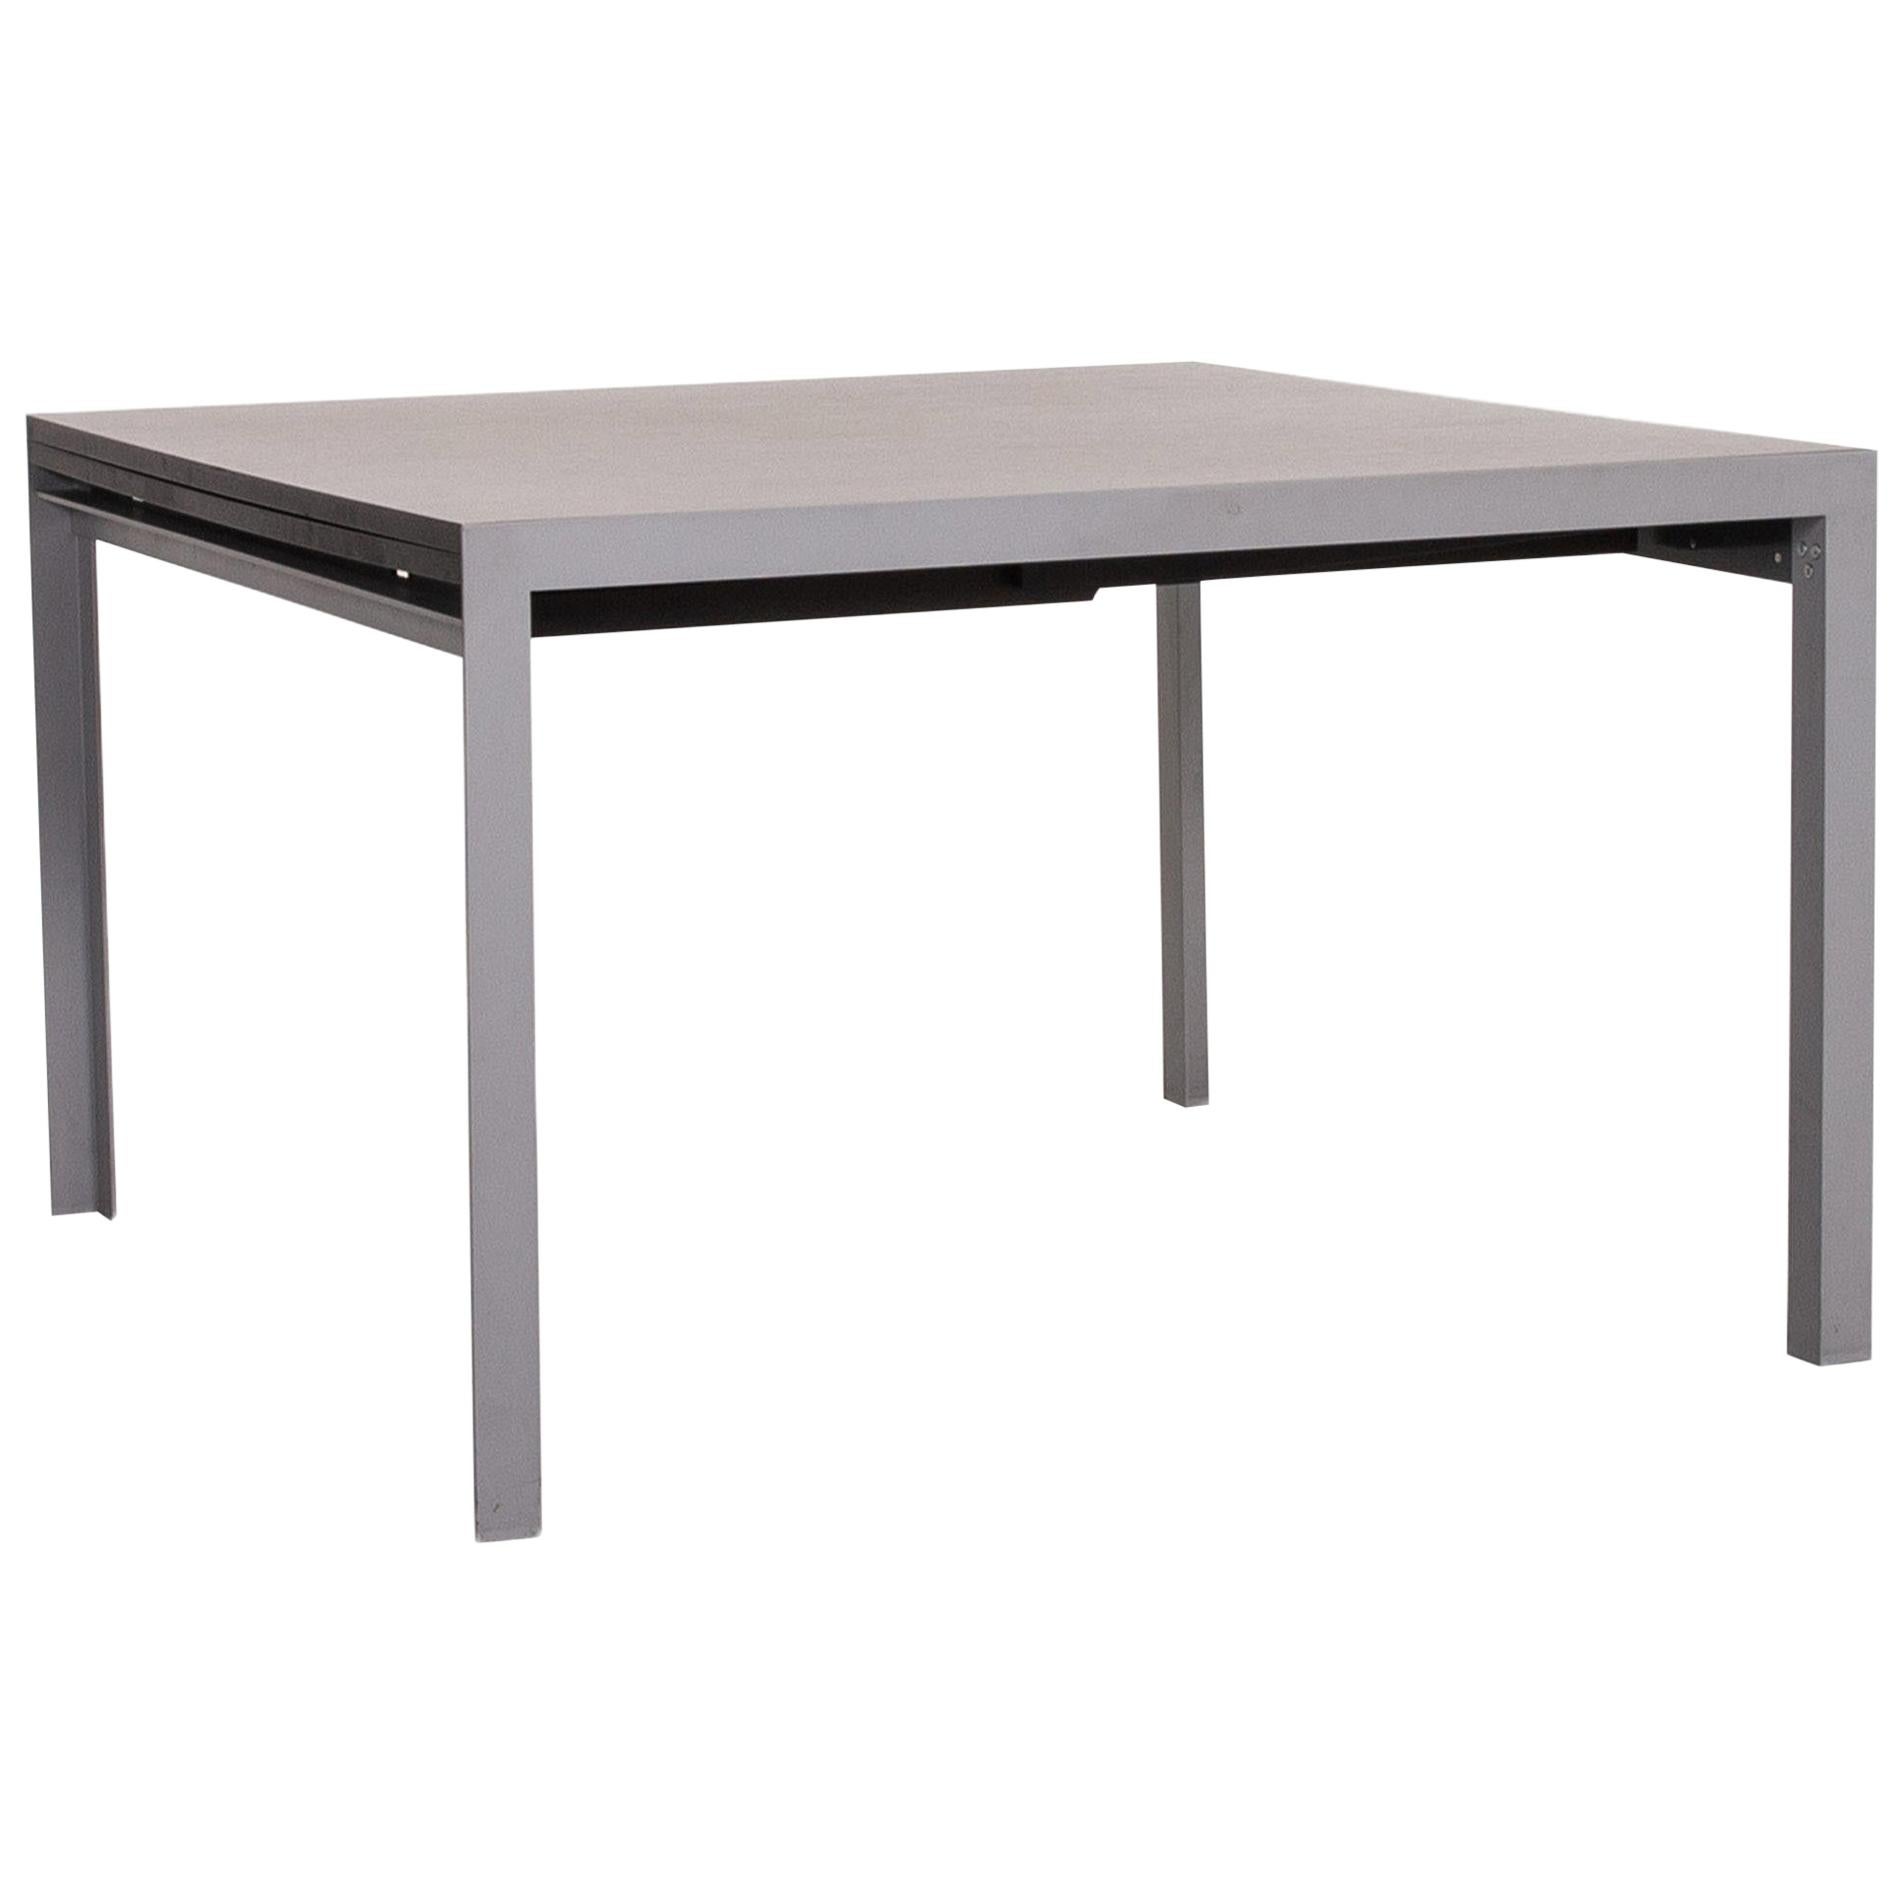 Zanotta Estenso Metal Dining Table Wood Brown Folding Table Function For Sale